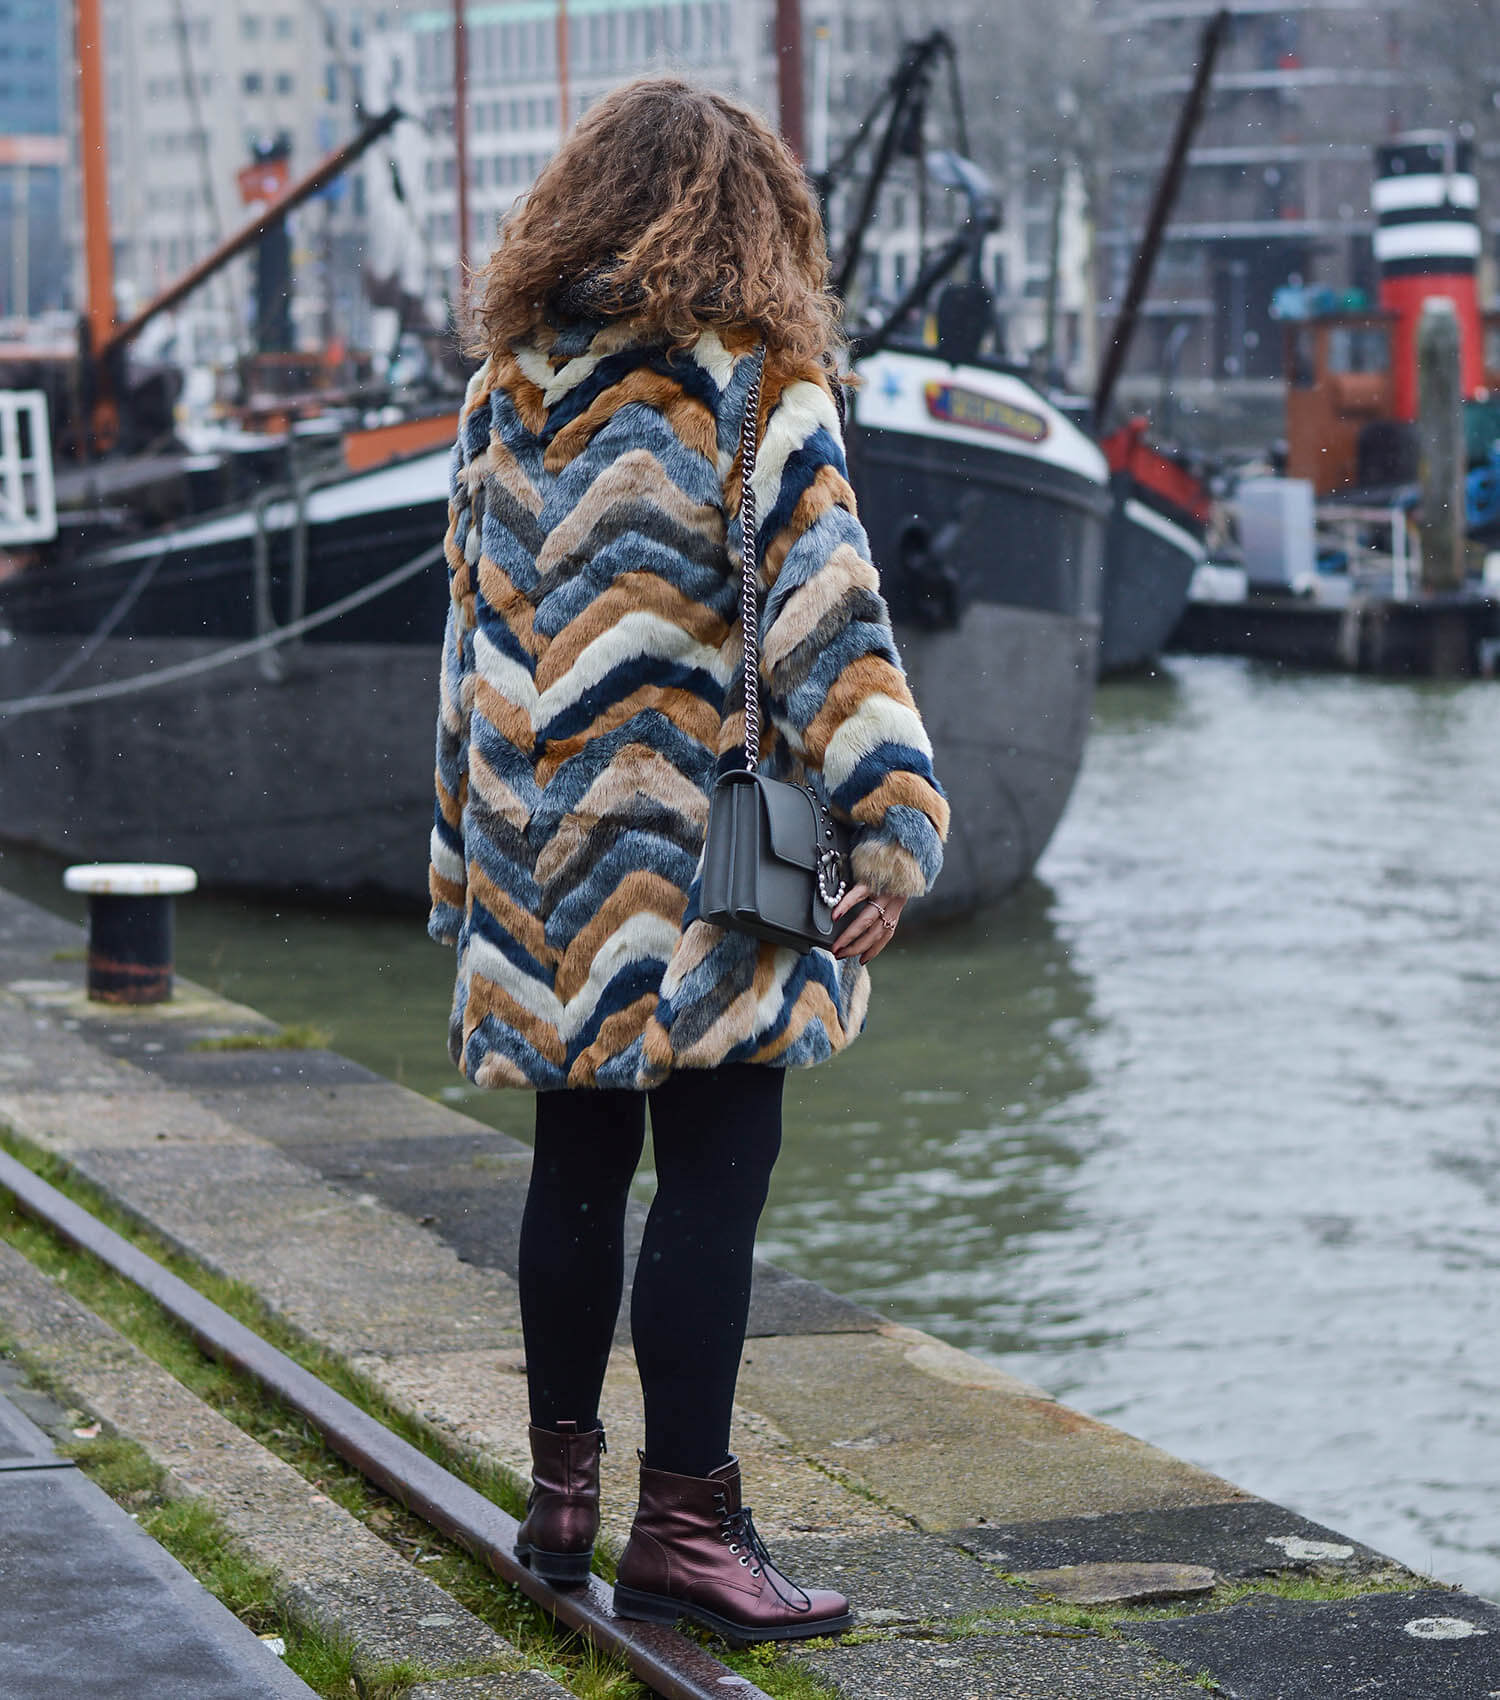 Kationette-Outfit-Fake-Fur-Coat-Pinko-Bag-and-Metallic-Boots-Rotterdam-fashionblogger-streetstyle